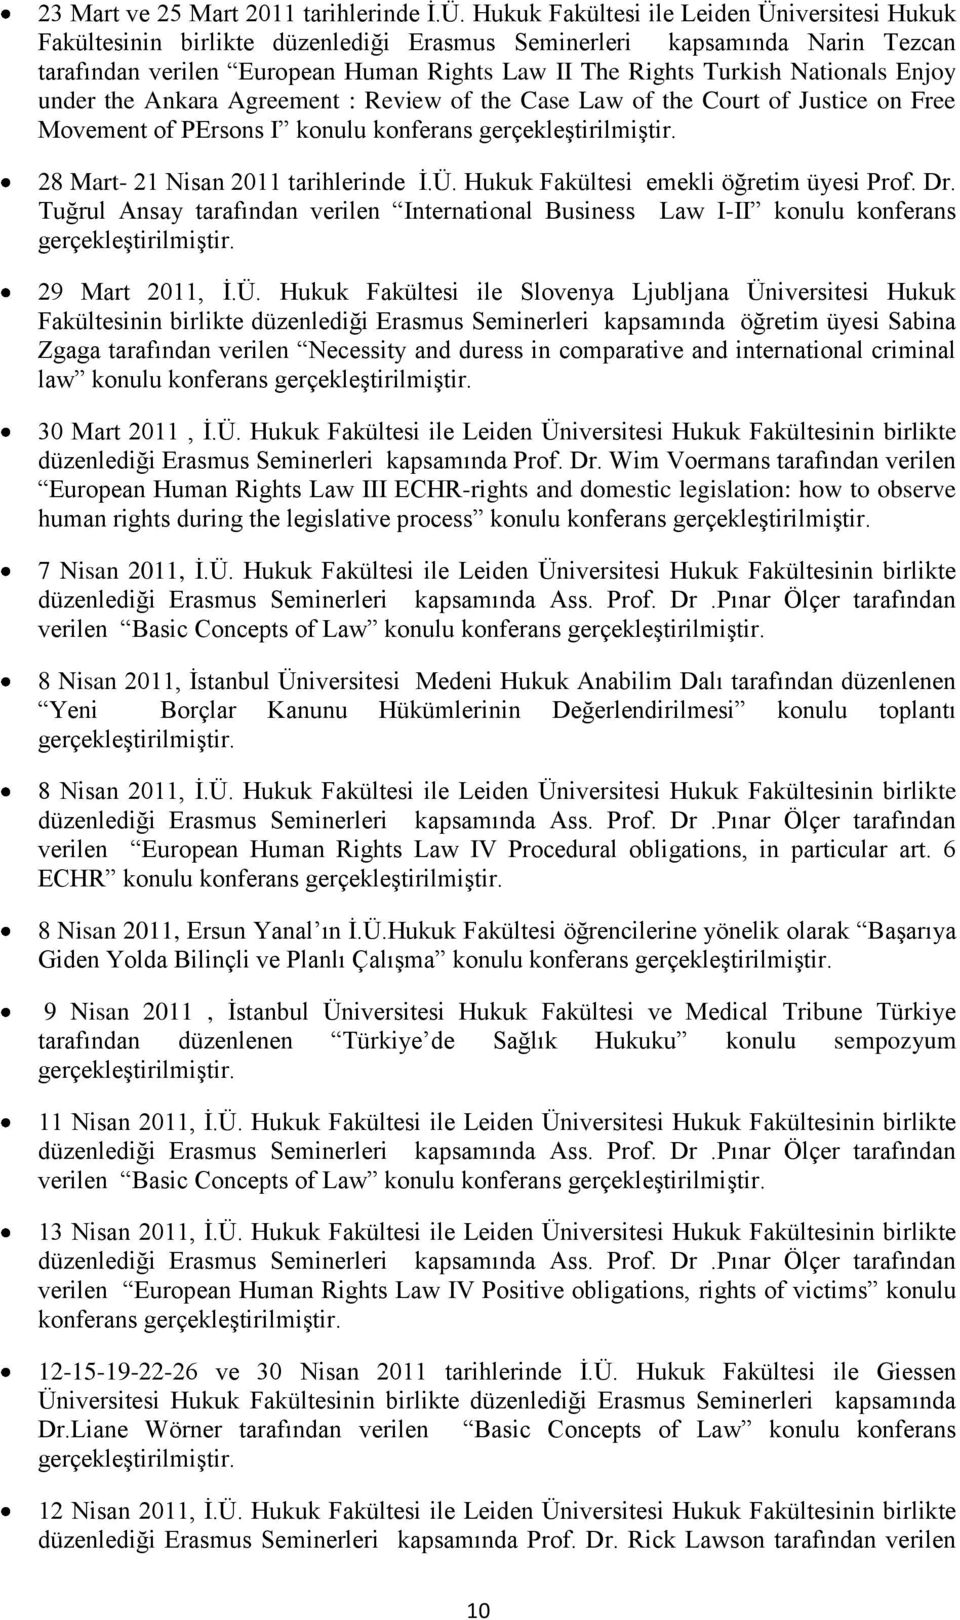 Nationals Enjoy under the Ankara Agreement : Review of the Case Law of the Court of Justice on Free Movement of PErsons I konulu konferans 28 Mart- 21 Nisan 2011 tarihlerinde İ.Ü.